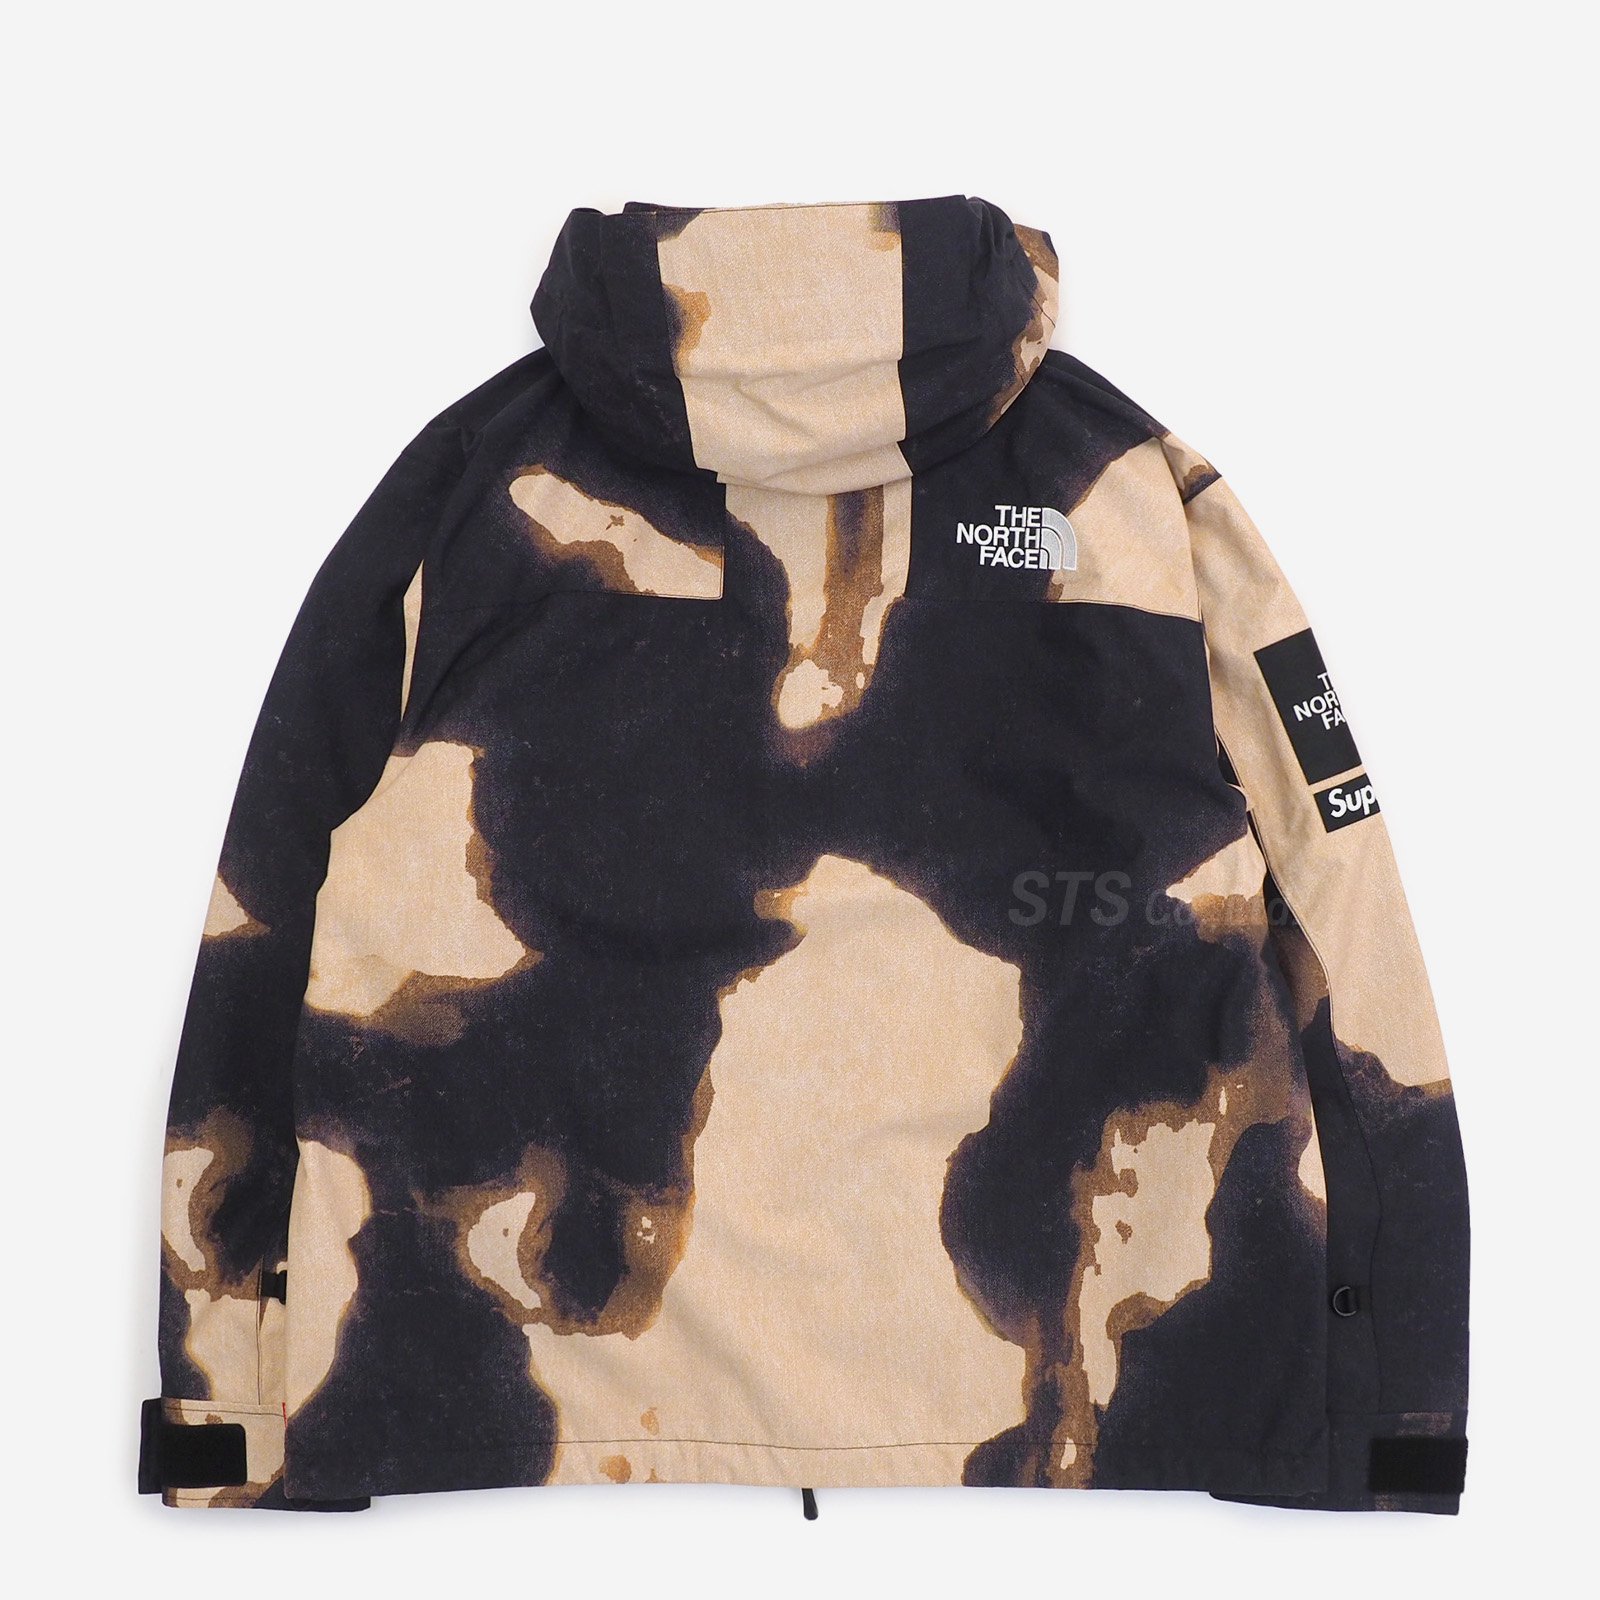 Supreme/The North Face Bleached Denim Print Mountain Jacket 